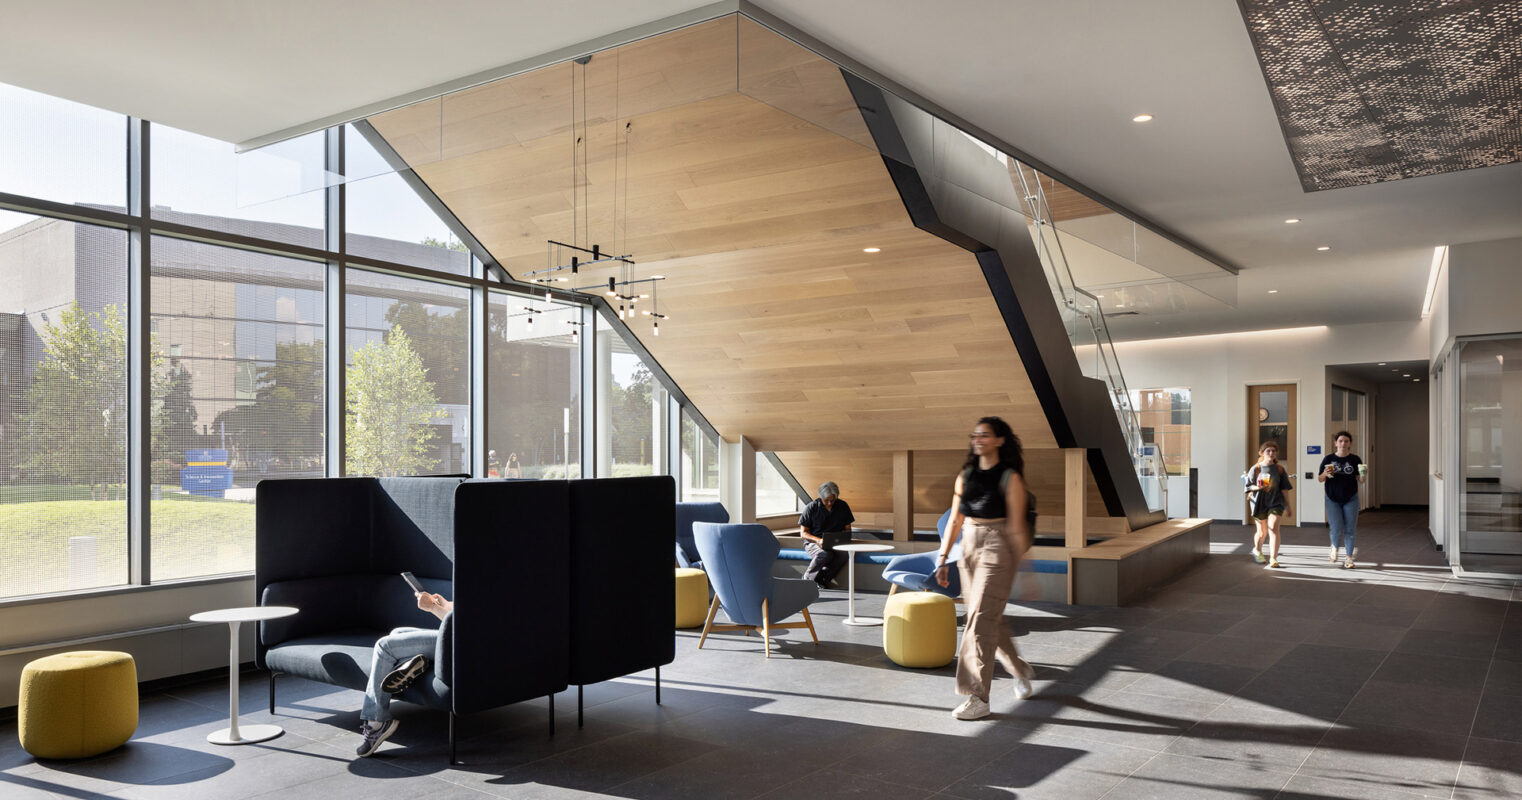 Warm natural light floods a modern lobby with a geometric wood-paneled staircase as the centerpiece. Sleek, dark furniture contrasts with the light floor, accented by vibrant yellow ottomans. Expansive glass walls offer a seamless indoor-outdoor connection.